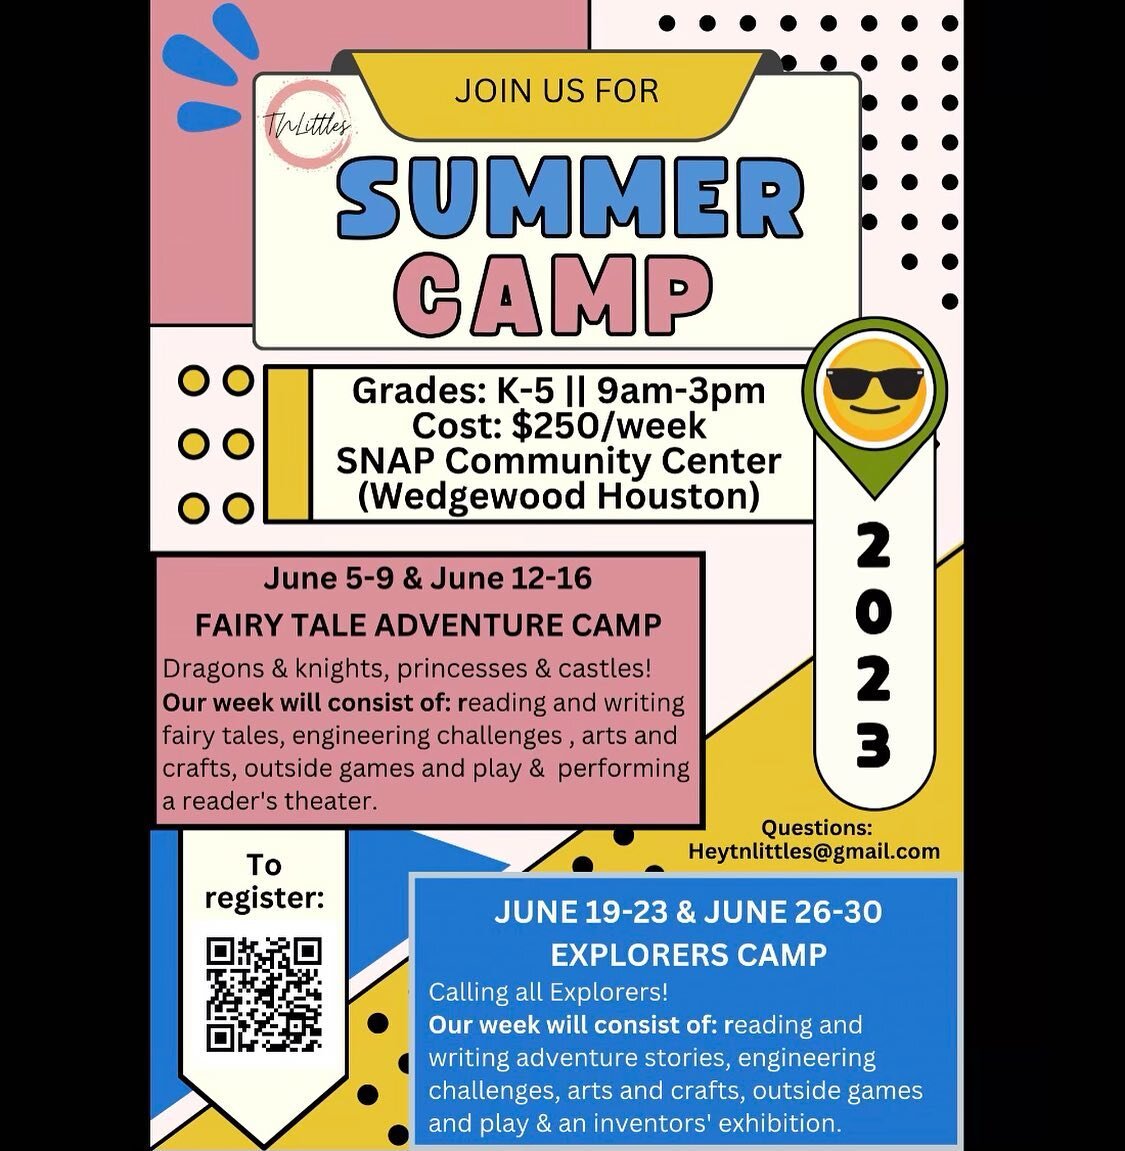 The SNAP Center will be hosting a TNLittles Summer Camp this June! 

Find out more details and register at: https://docs.google.com/forms/d/e/1FAIpQLScpRA6DUvFrA0BXuedVbrUau4-oy1mKHraUAoei0IVhABj1pg/viewform